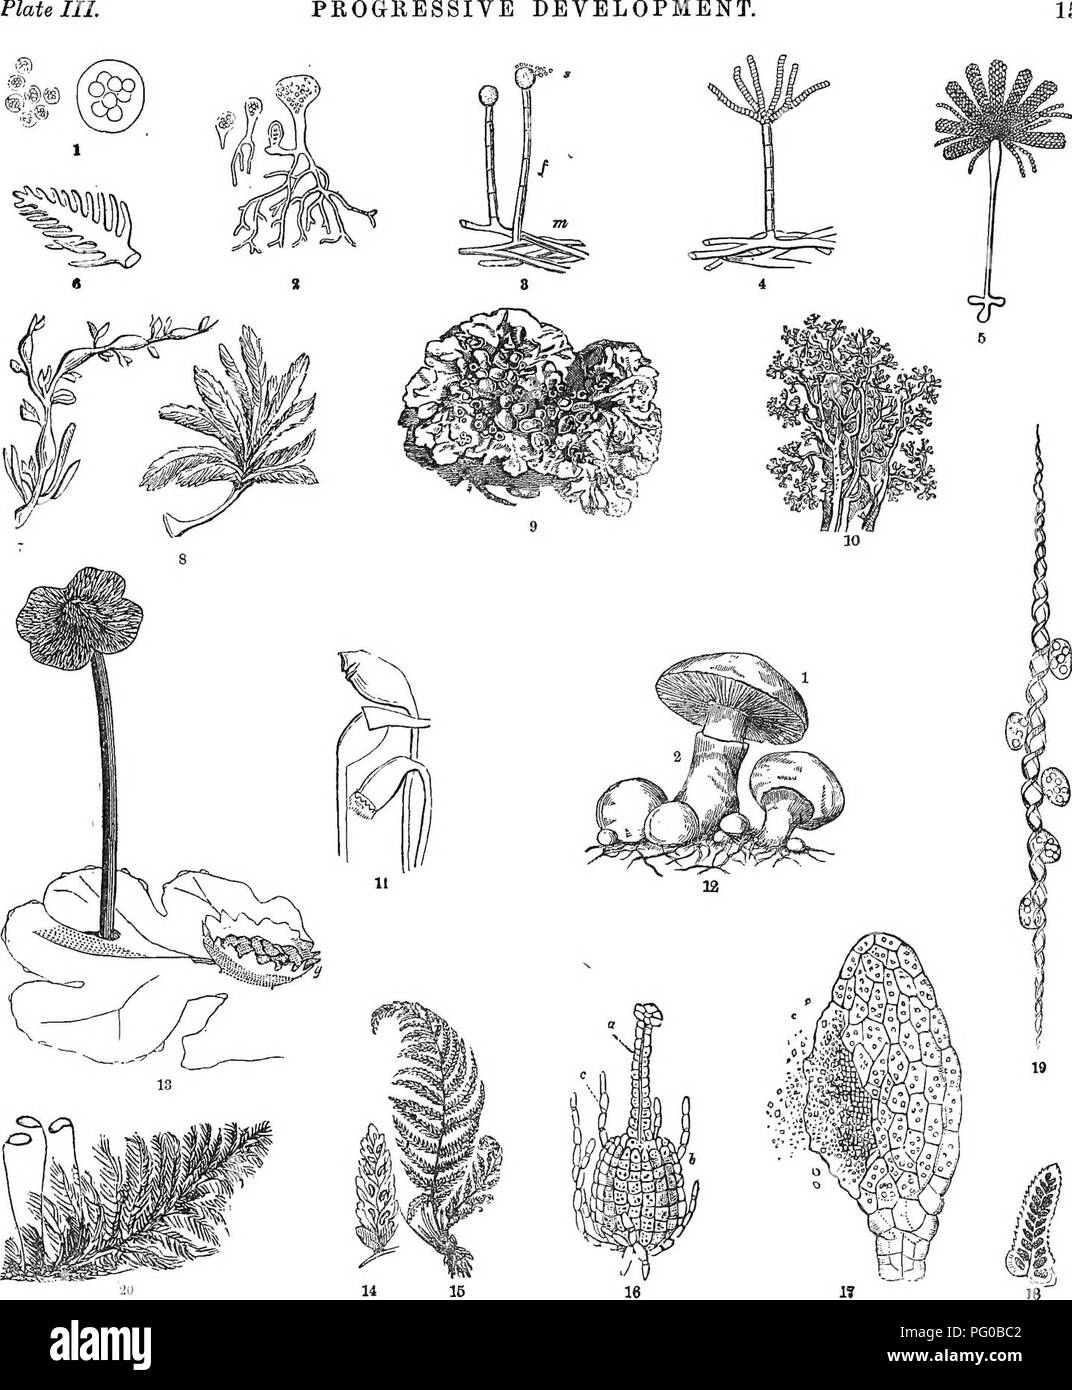 . Analytical class-book of botany : designed for academies and private students. Plants. PKOGRESSIVE DEVELOPMENT, 15. What is the structure of the plants in figs. 1, C and 2. What docs fig. 1 re- present ?—fig. 6 ?—fig. 2 ? Describe each. What change in figs. 3, 4, 5 ? Pe- Bcribe fig. T. What kind of leaf at figs. 8, 9,13,15? Name of the stalk in fig. 12. Describe the figures, and define its other parts. Describe fig. 13, What kind if apparatus in figs. 16,17,19. Describe each. Describe figs. 14,15, 20. What is the liooH called ? Define other parts. Explain fig. 11. What figures repre- sent Un Stock Photo